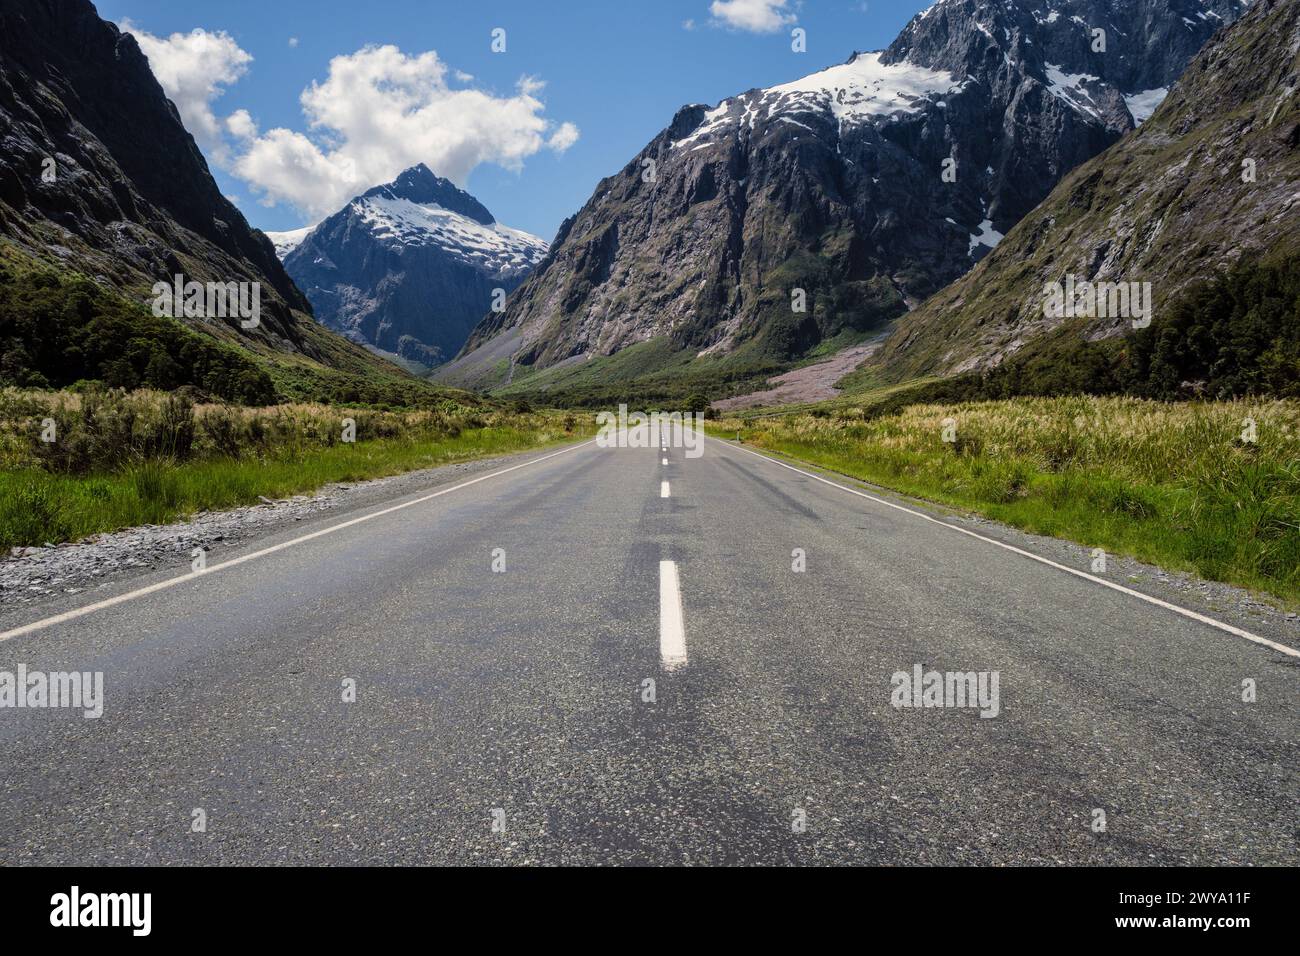 The Milford Sound Highway at Monkey Creek looking towards Mount Talbot in the distance, Fiordland National Park, Southland, South Island, New Zealand Stock Photo